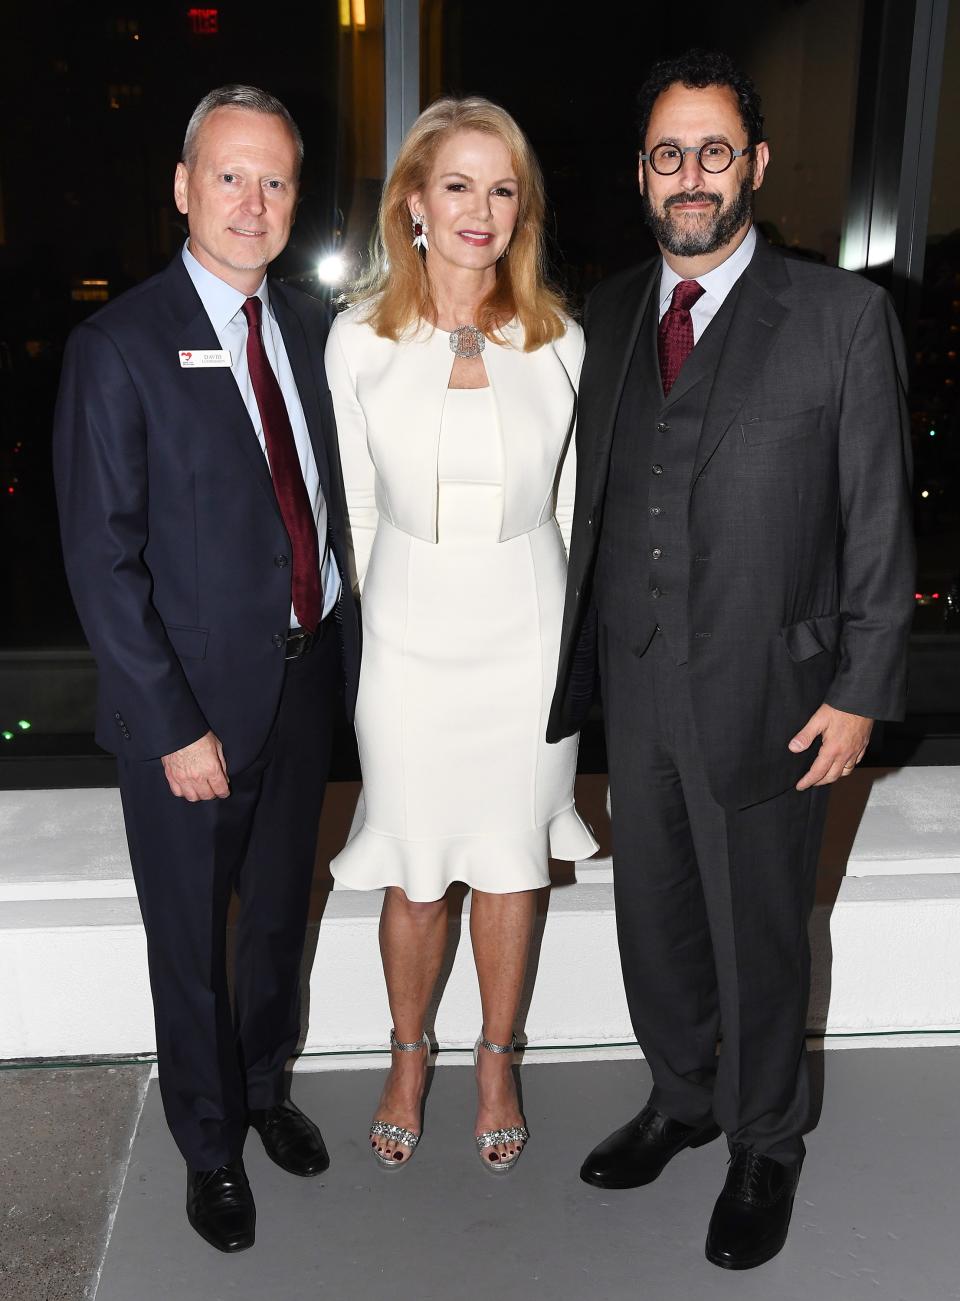 The 12th annual event celebrated New York’s most charitable.